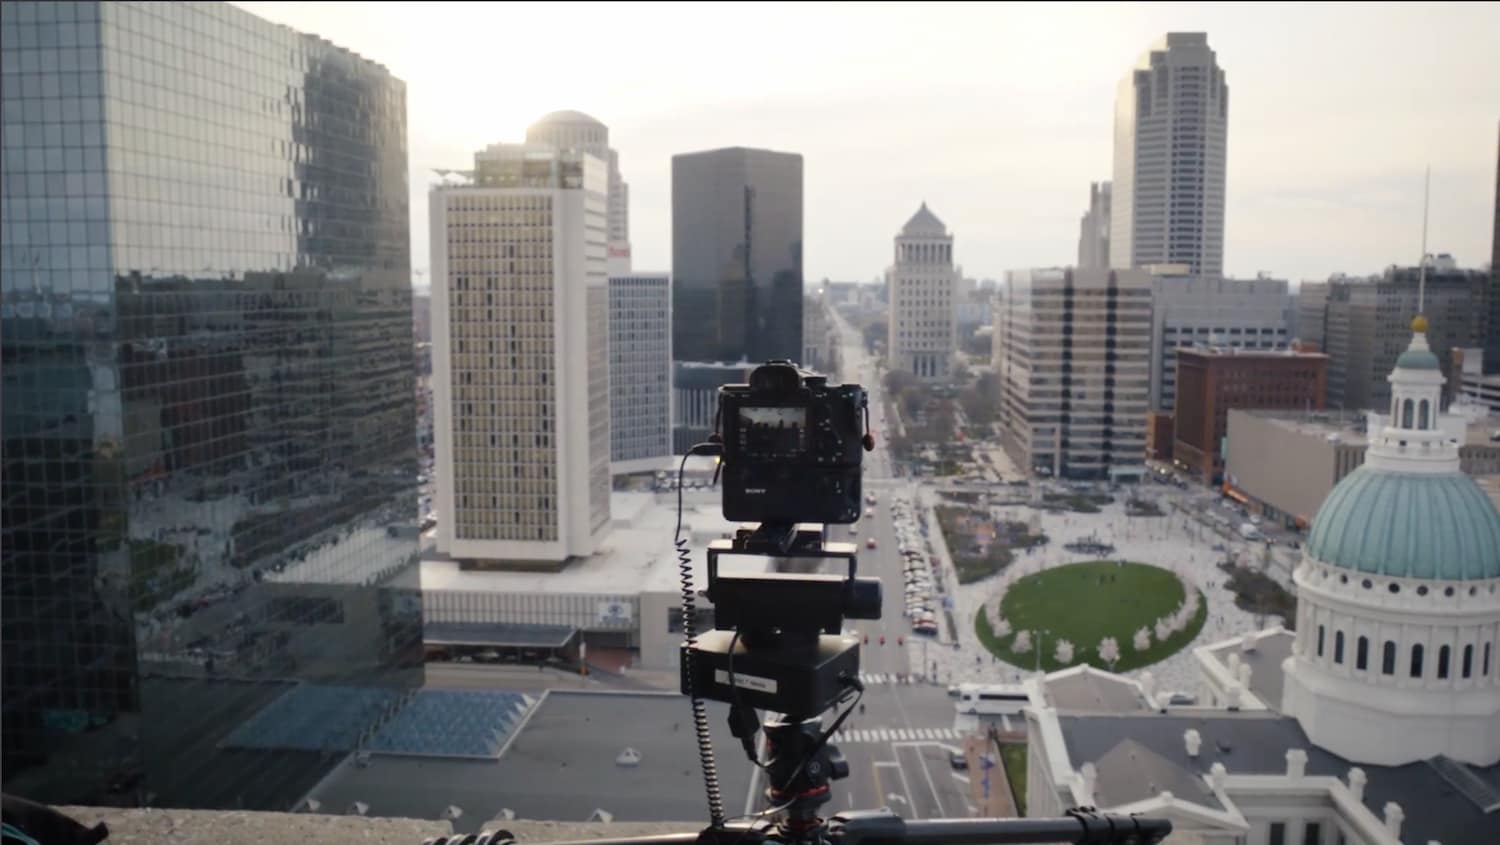 Time-Lapse Photography & Editing with Drew Geraci - | PRO EDU Tutorial for photographers and video creators.